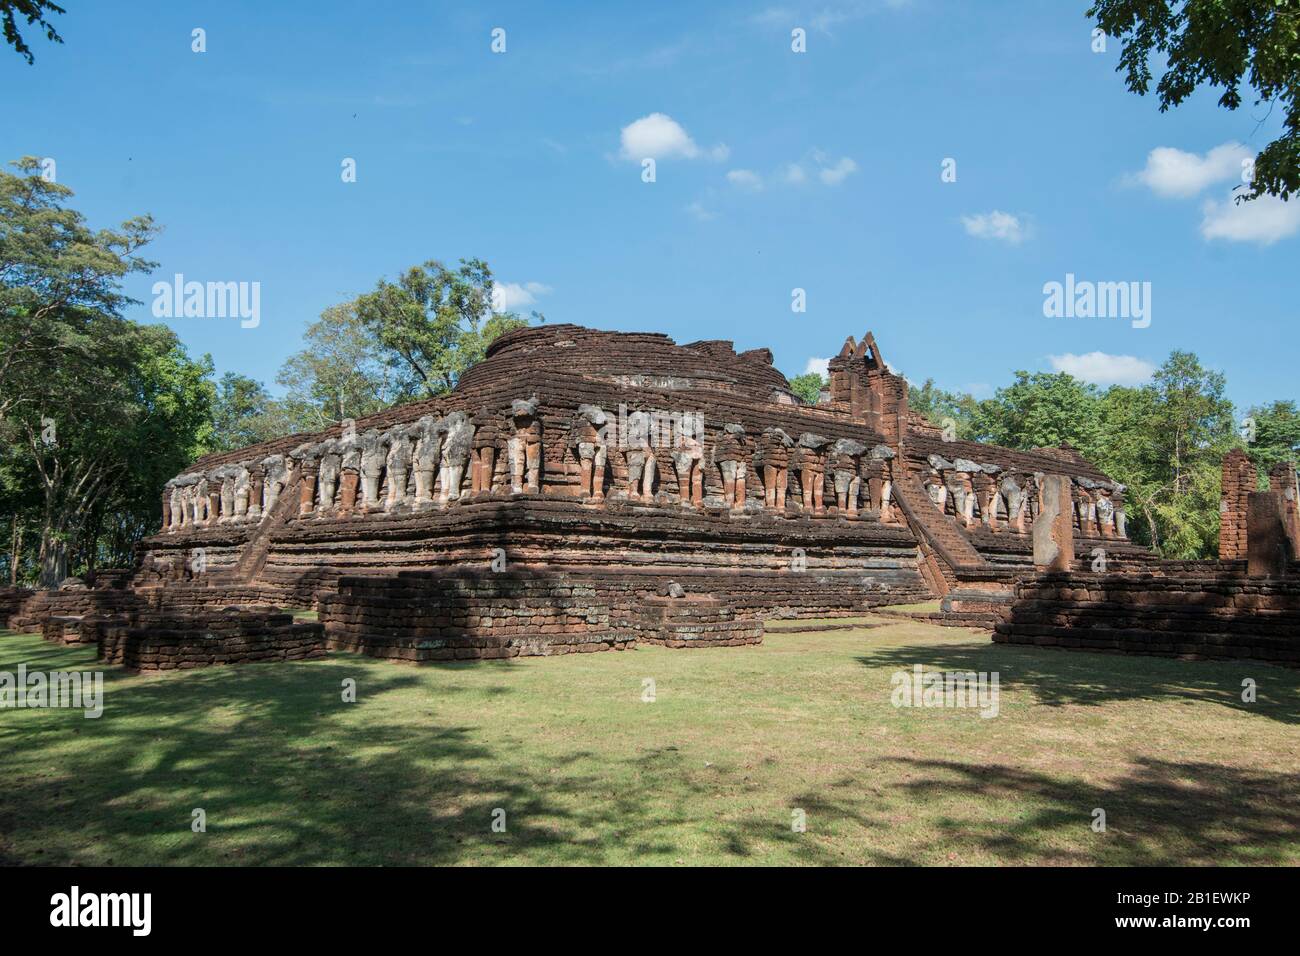 The Wat Chang Rob Temple in the town of Kamphaeng Phet in the Kamphaeng  Phet Province in North Thailand. Thailand, Kamphaeng Phet, November, 2019  Stock Photo - Alamy